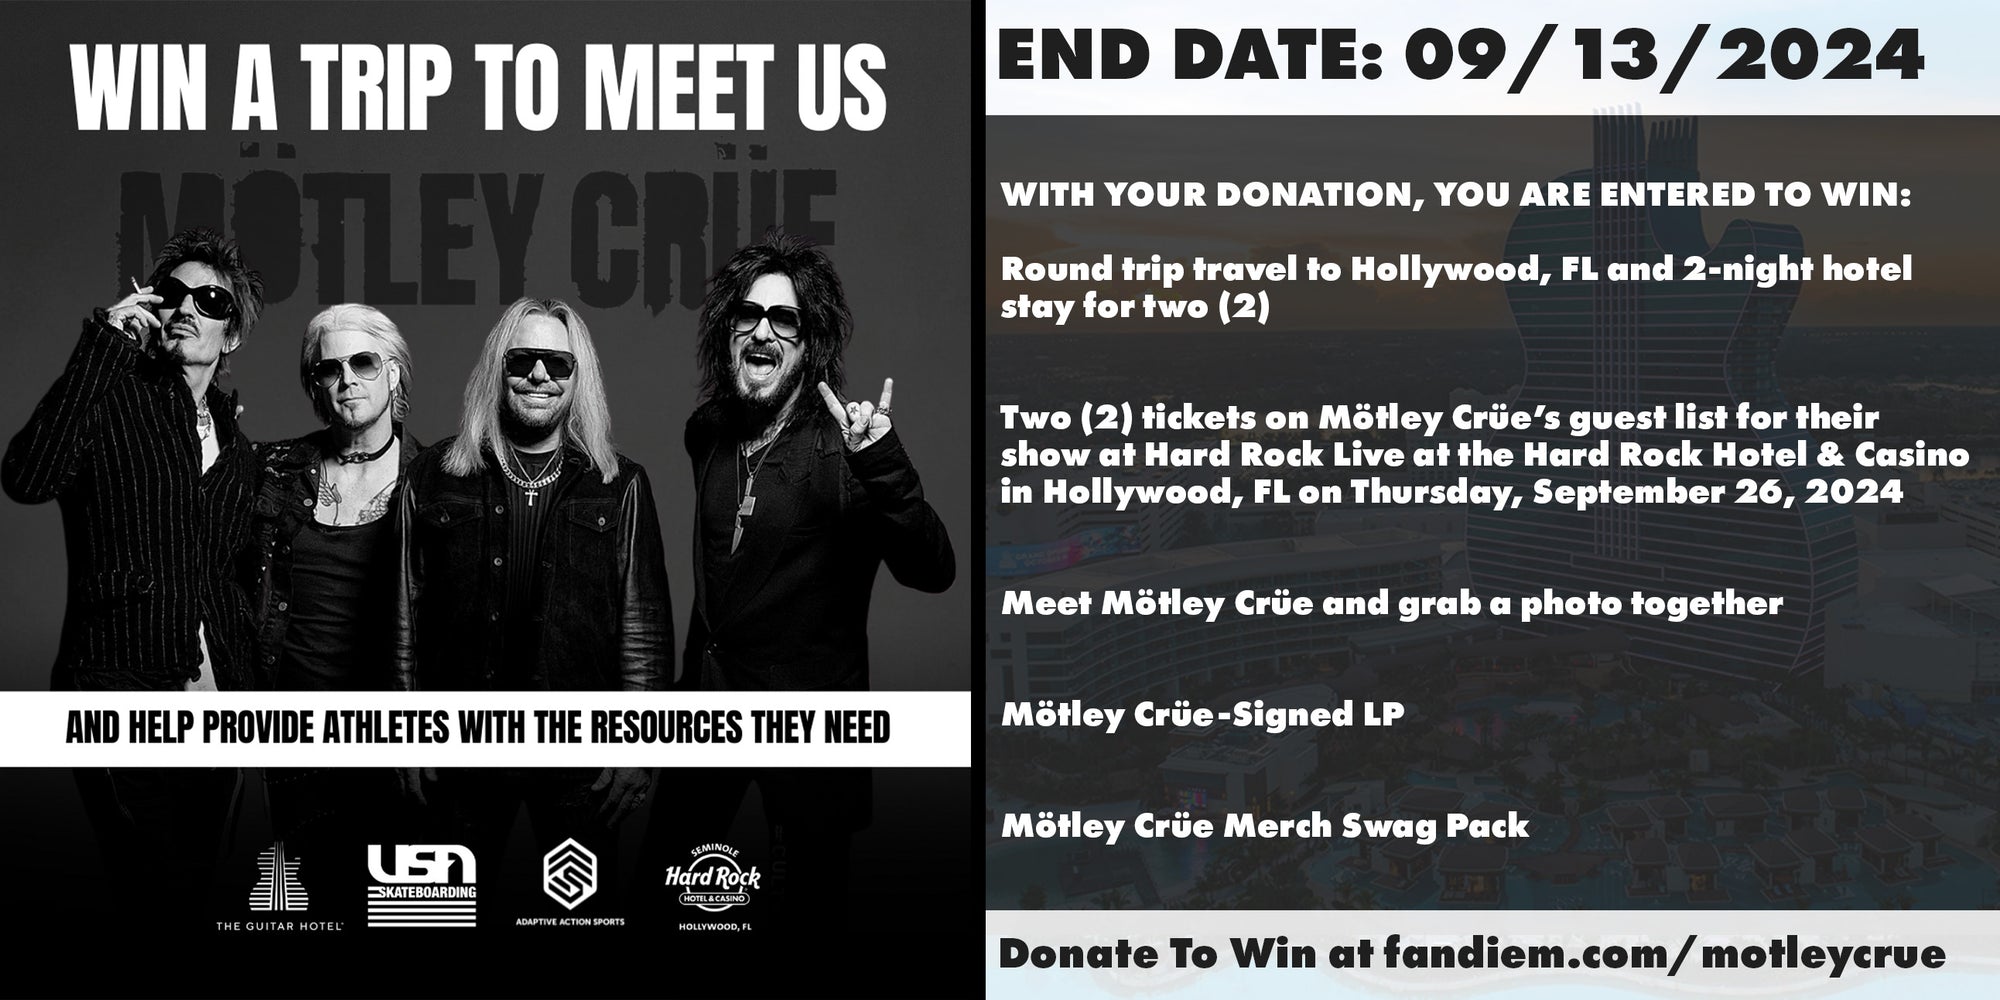 Meet Mötley Crüe at the Hard Rock Hotel and support USA Skateboarding